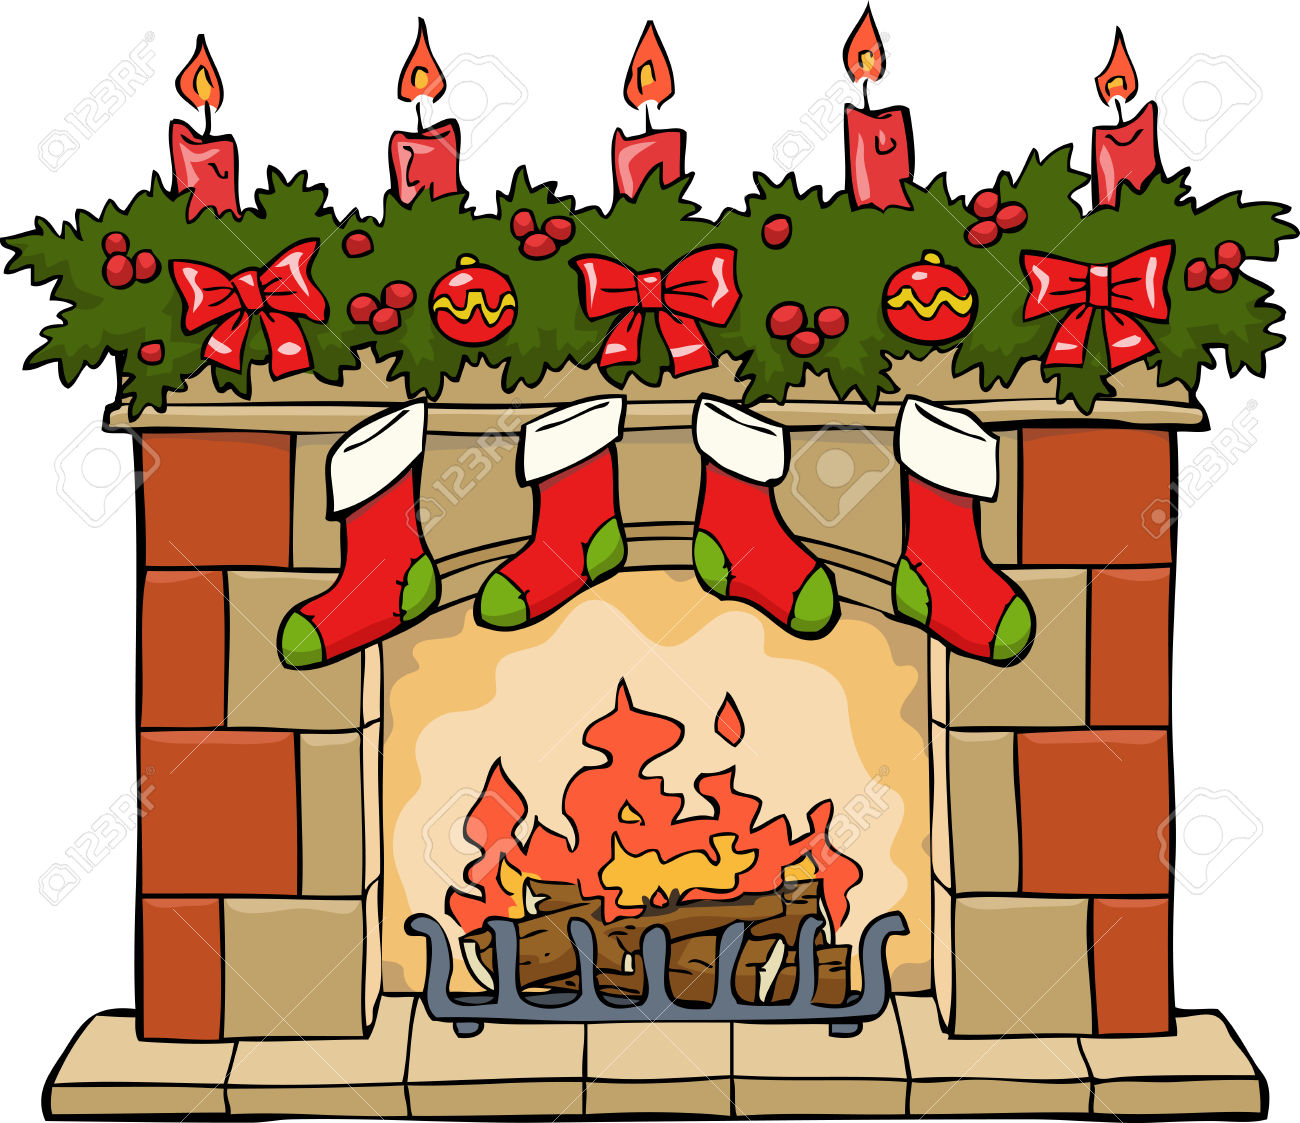 fireplace: Fireplace in Chris - Fireplace Clipart